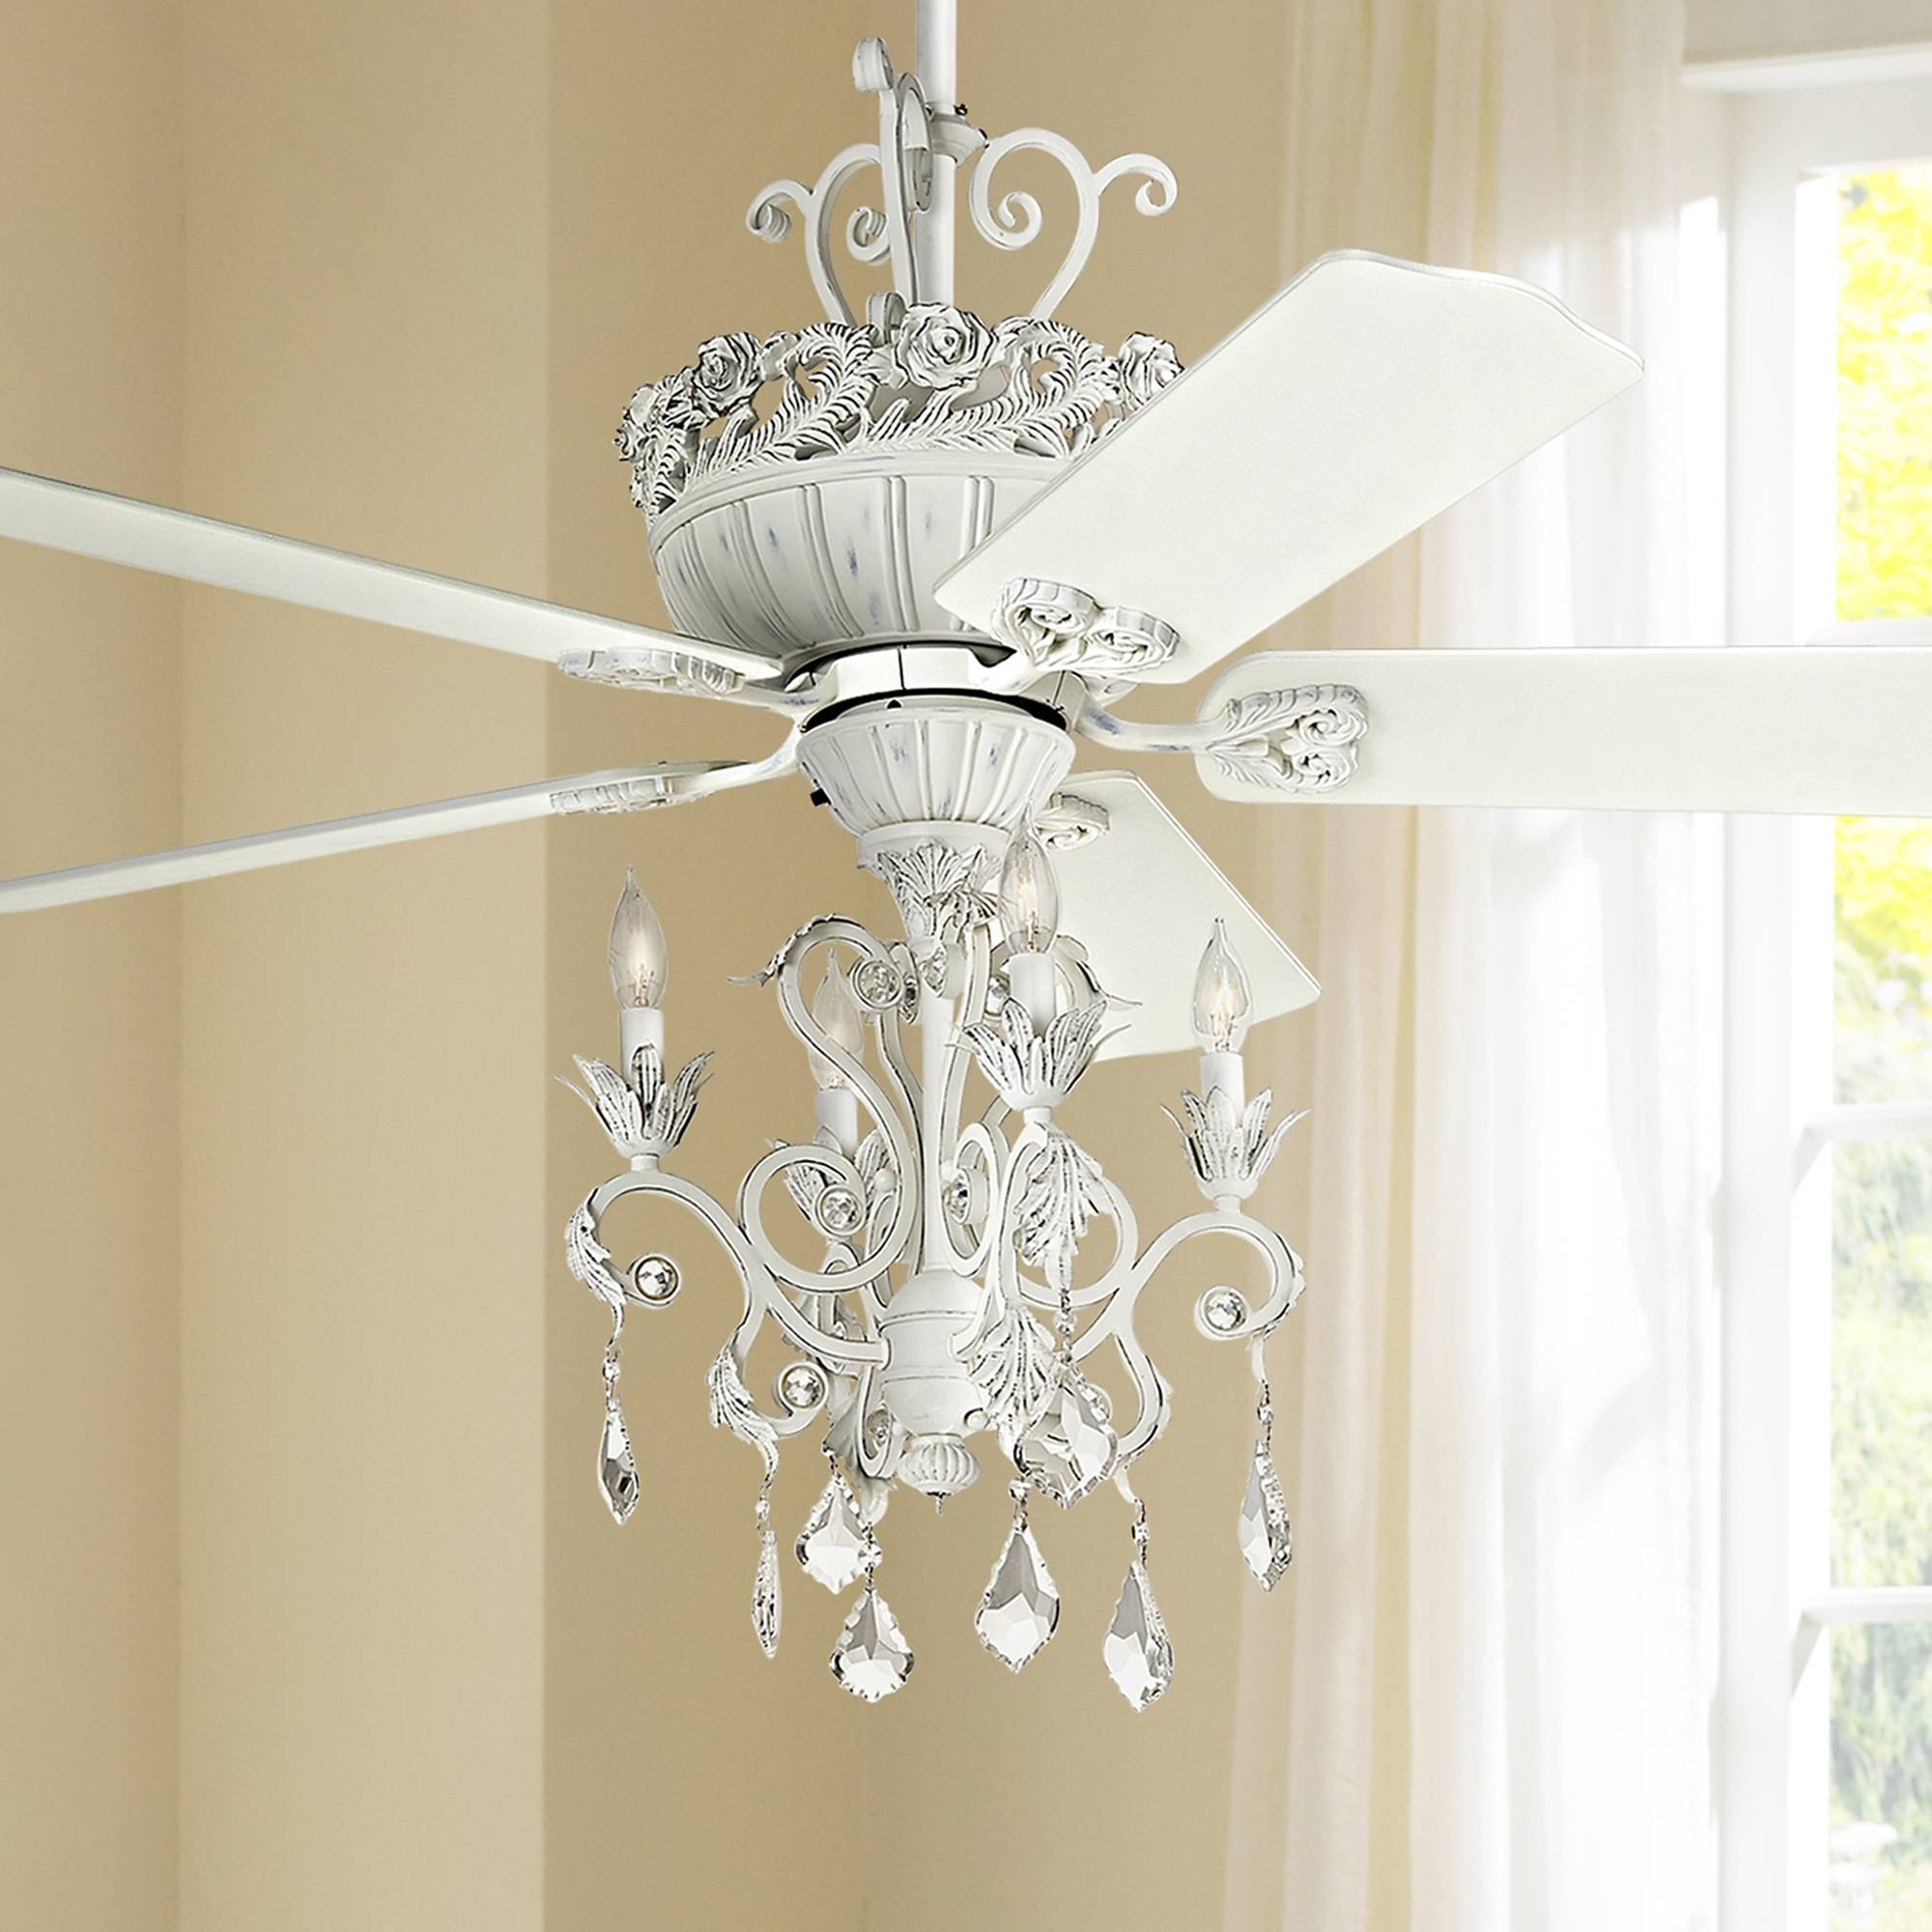 Details About 52 Shabby Chic Ceiling Fan With Light Led Chandelier Rubbed White Living Room